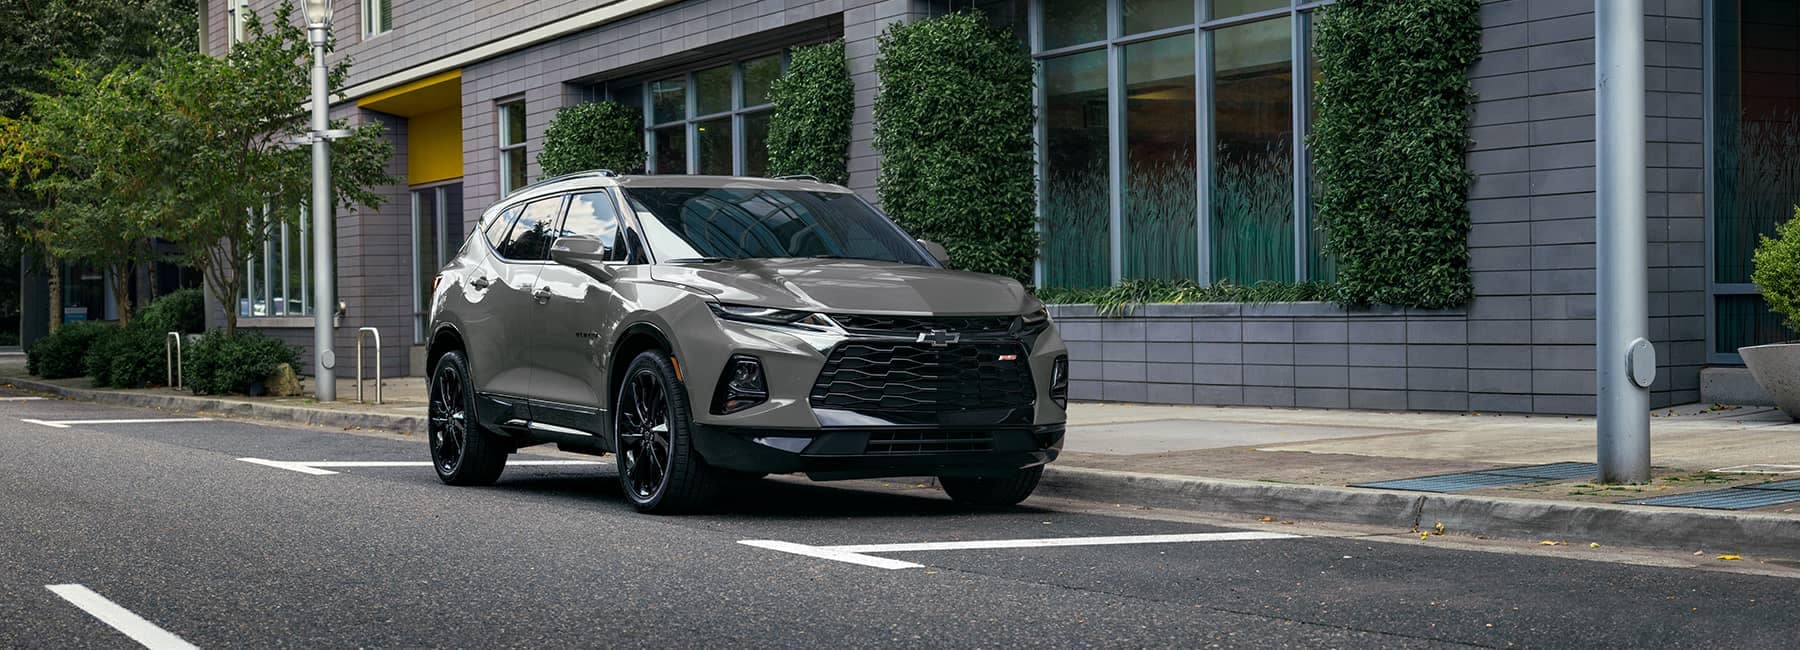 2021 Chevrolet Blazer parked in front of a city building